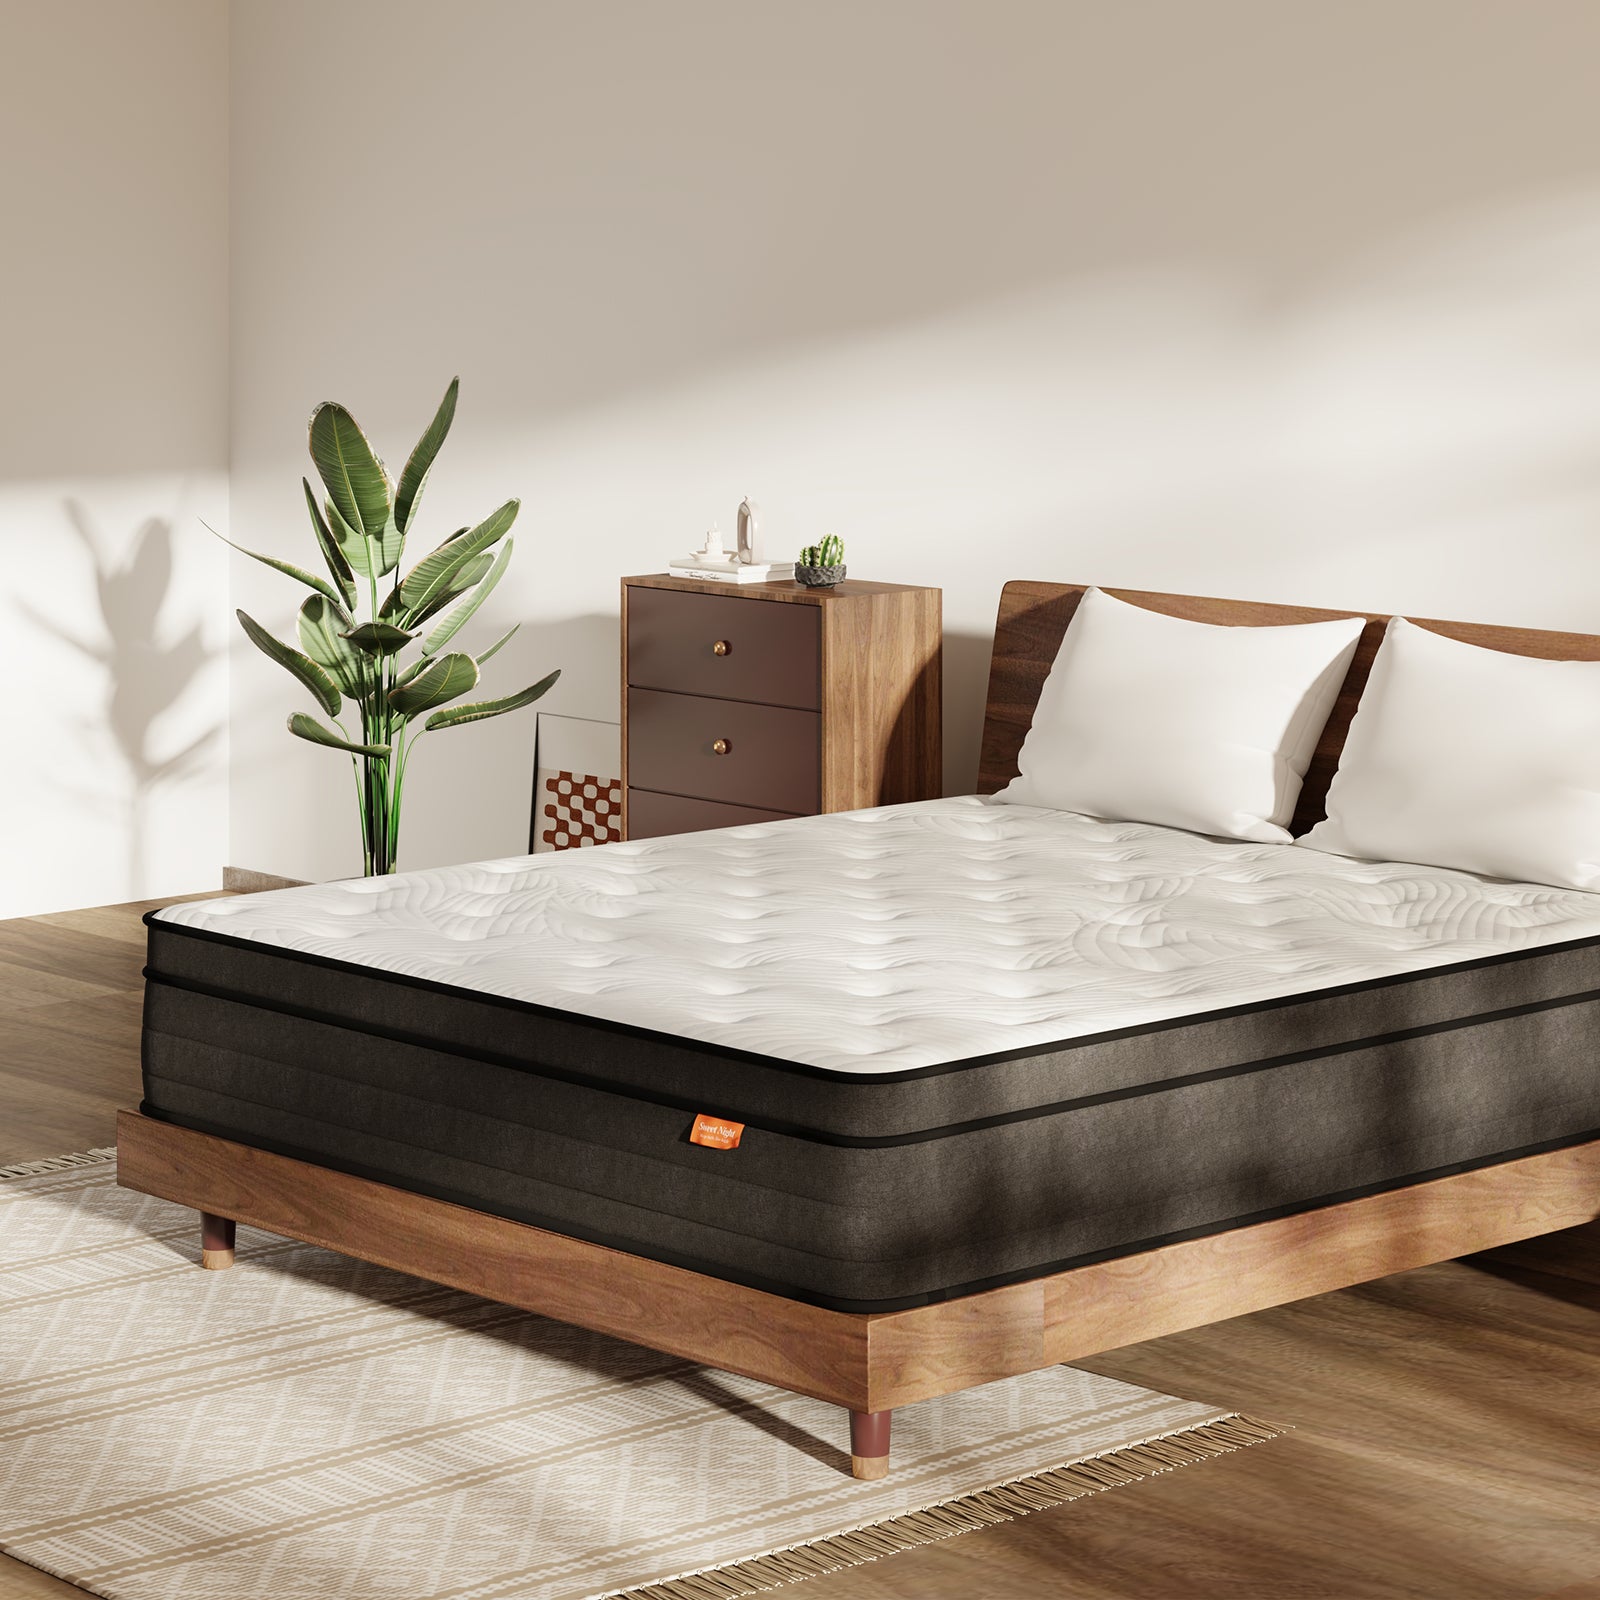 Best Extra Firm Mattress for Superior Support